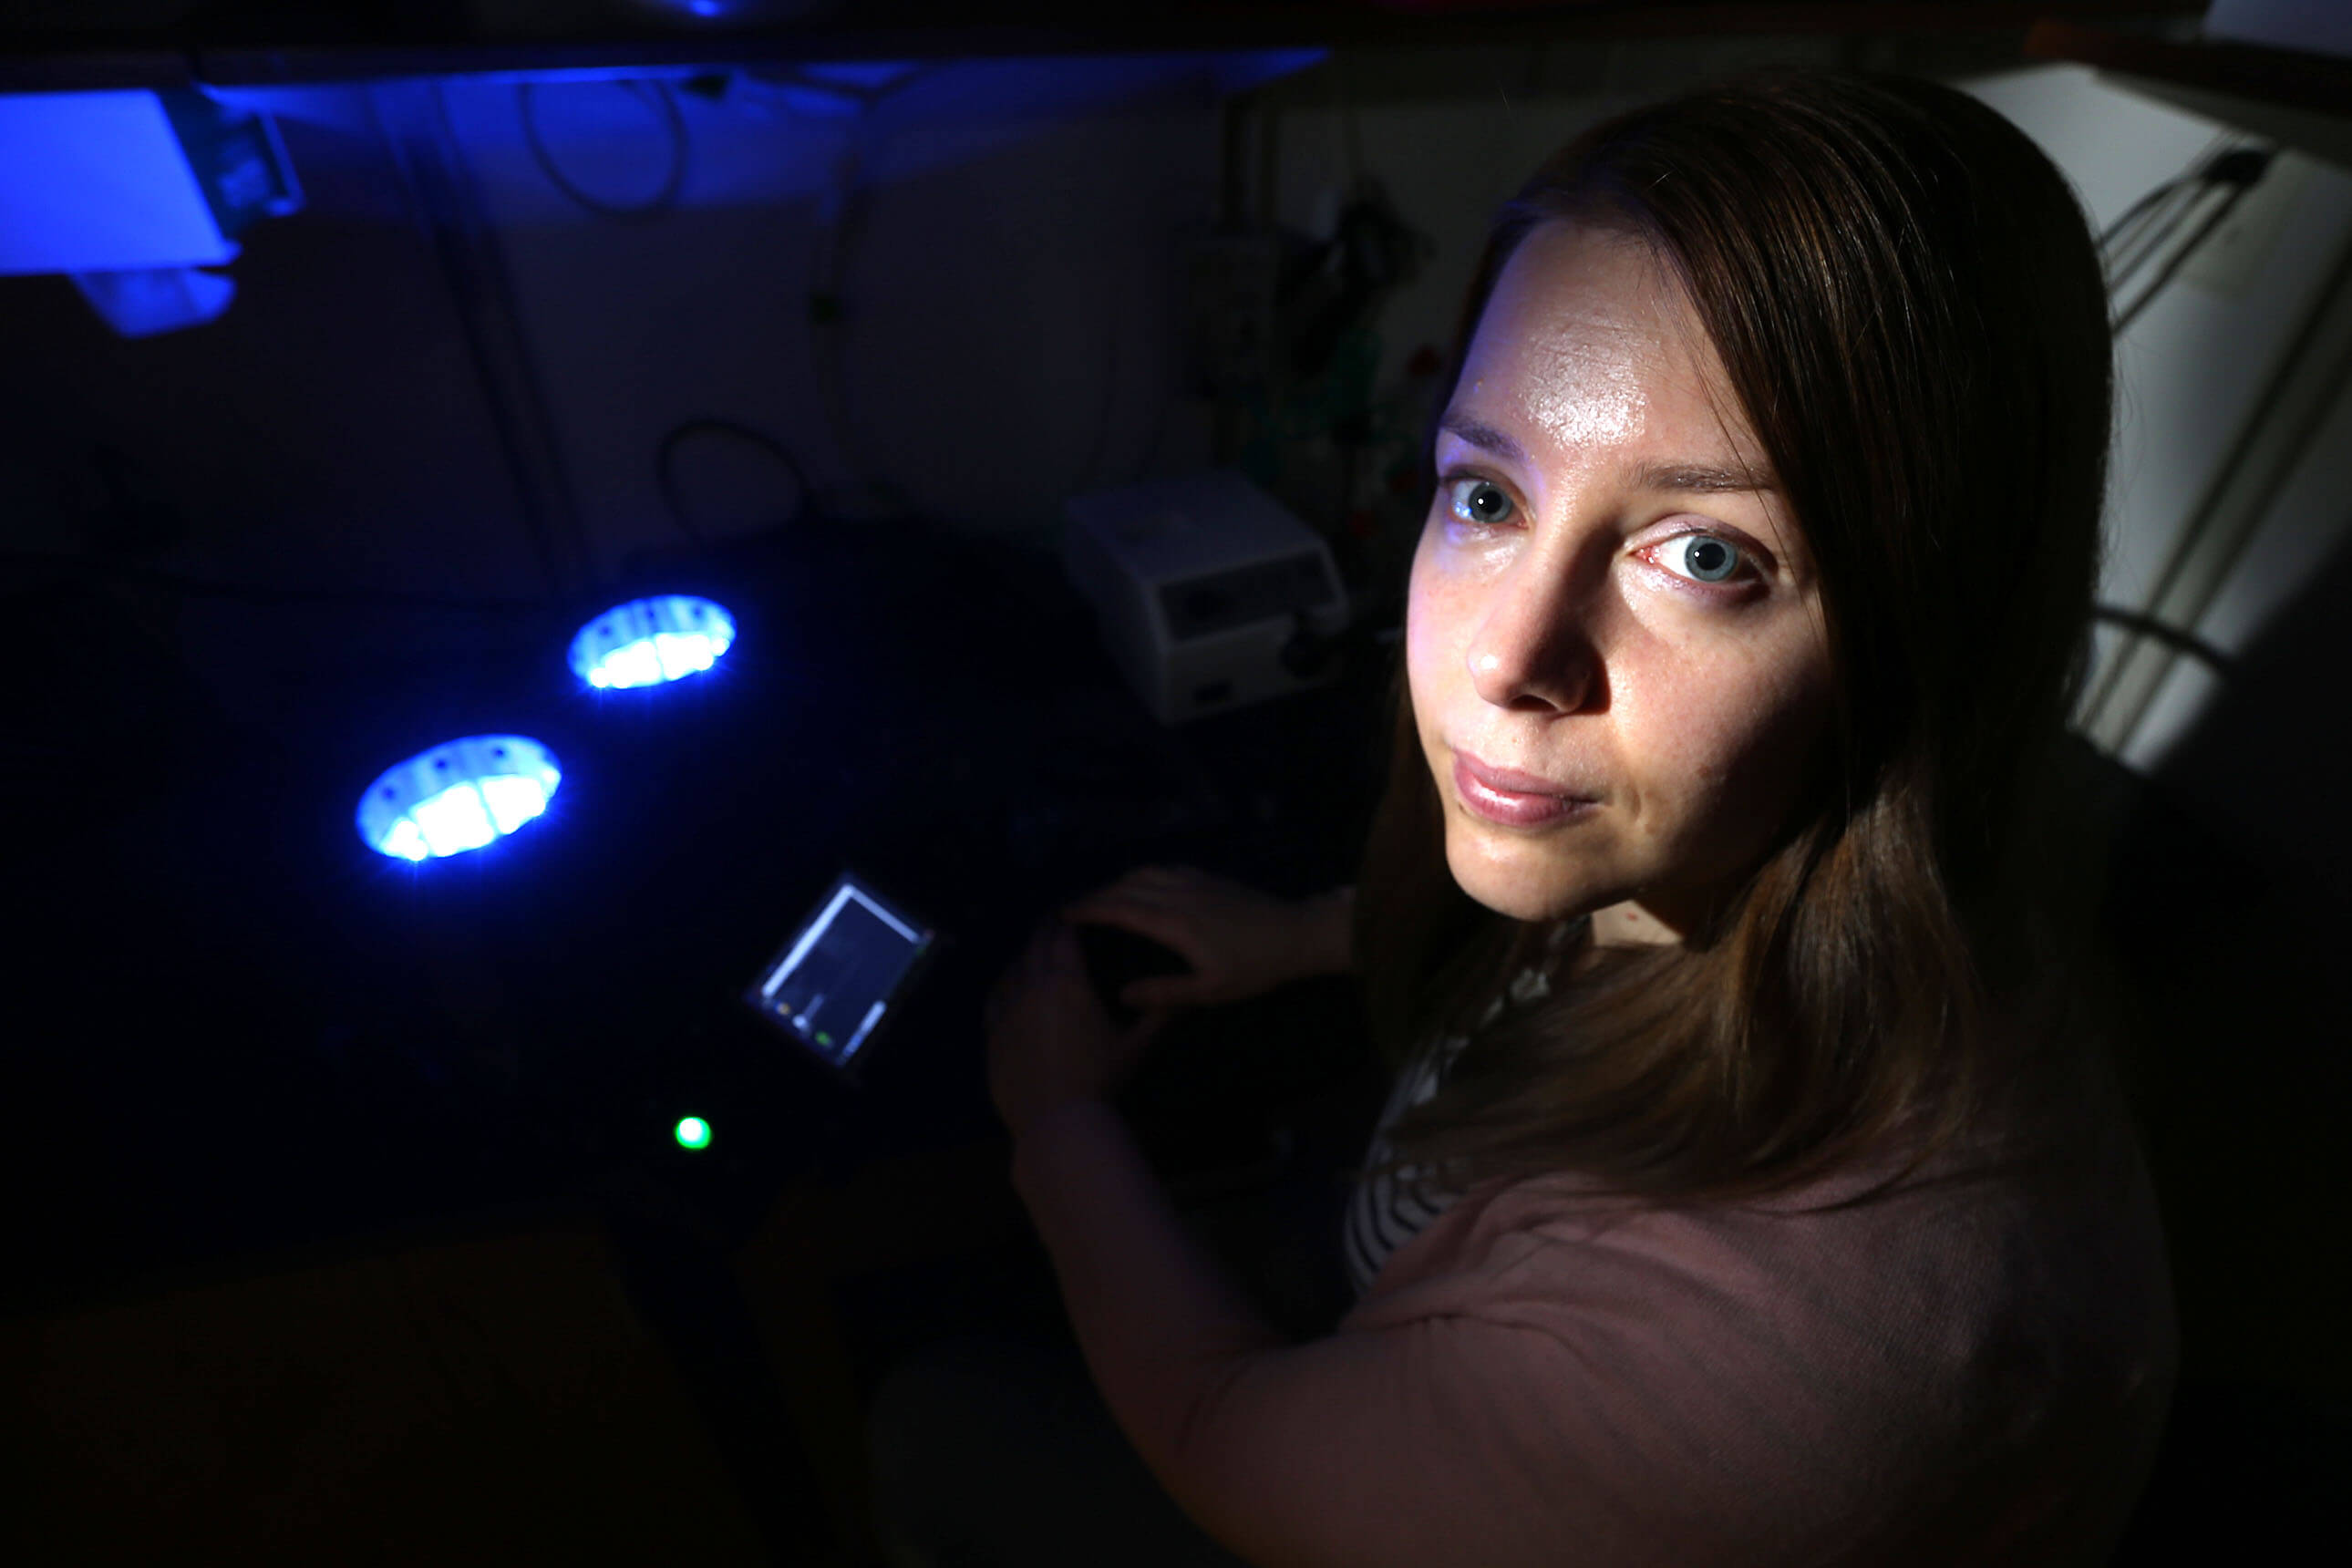 Purdue University assistant professor Vikki Weake led a study on vision loss in flies. The results, which were published in a scientific journal, could prove useful in understanding human ocular diseases. (Purdue University photo/Tom Campbell)